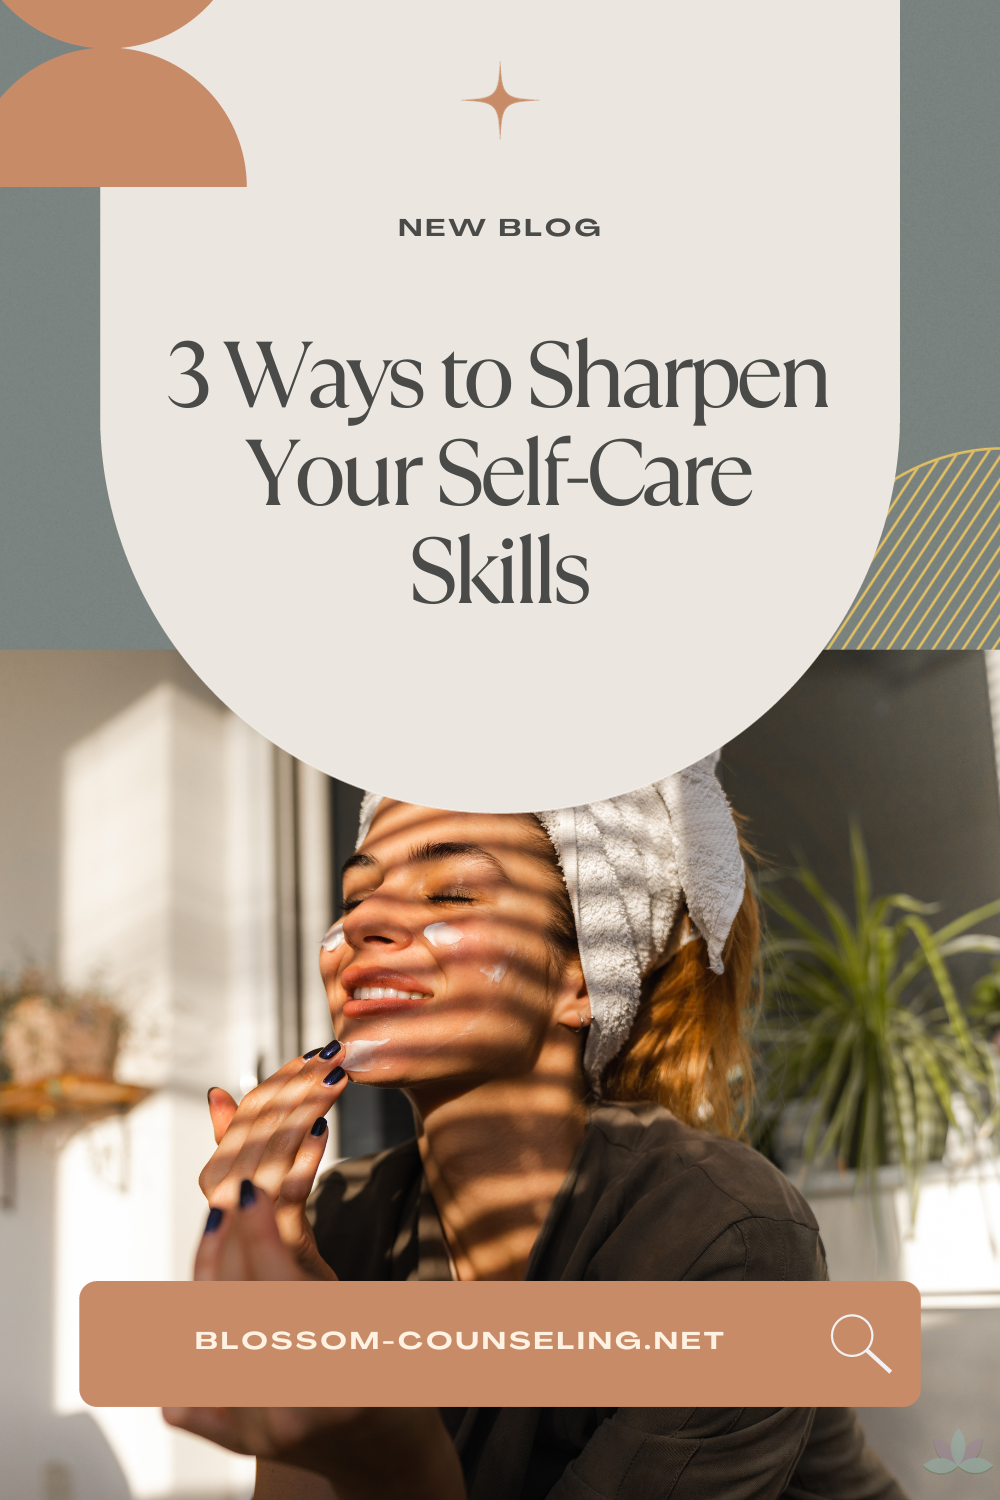 3 Ways to Sharpen Your Self-Care Skills